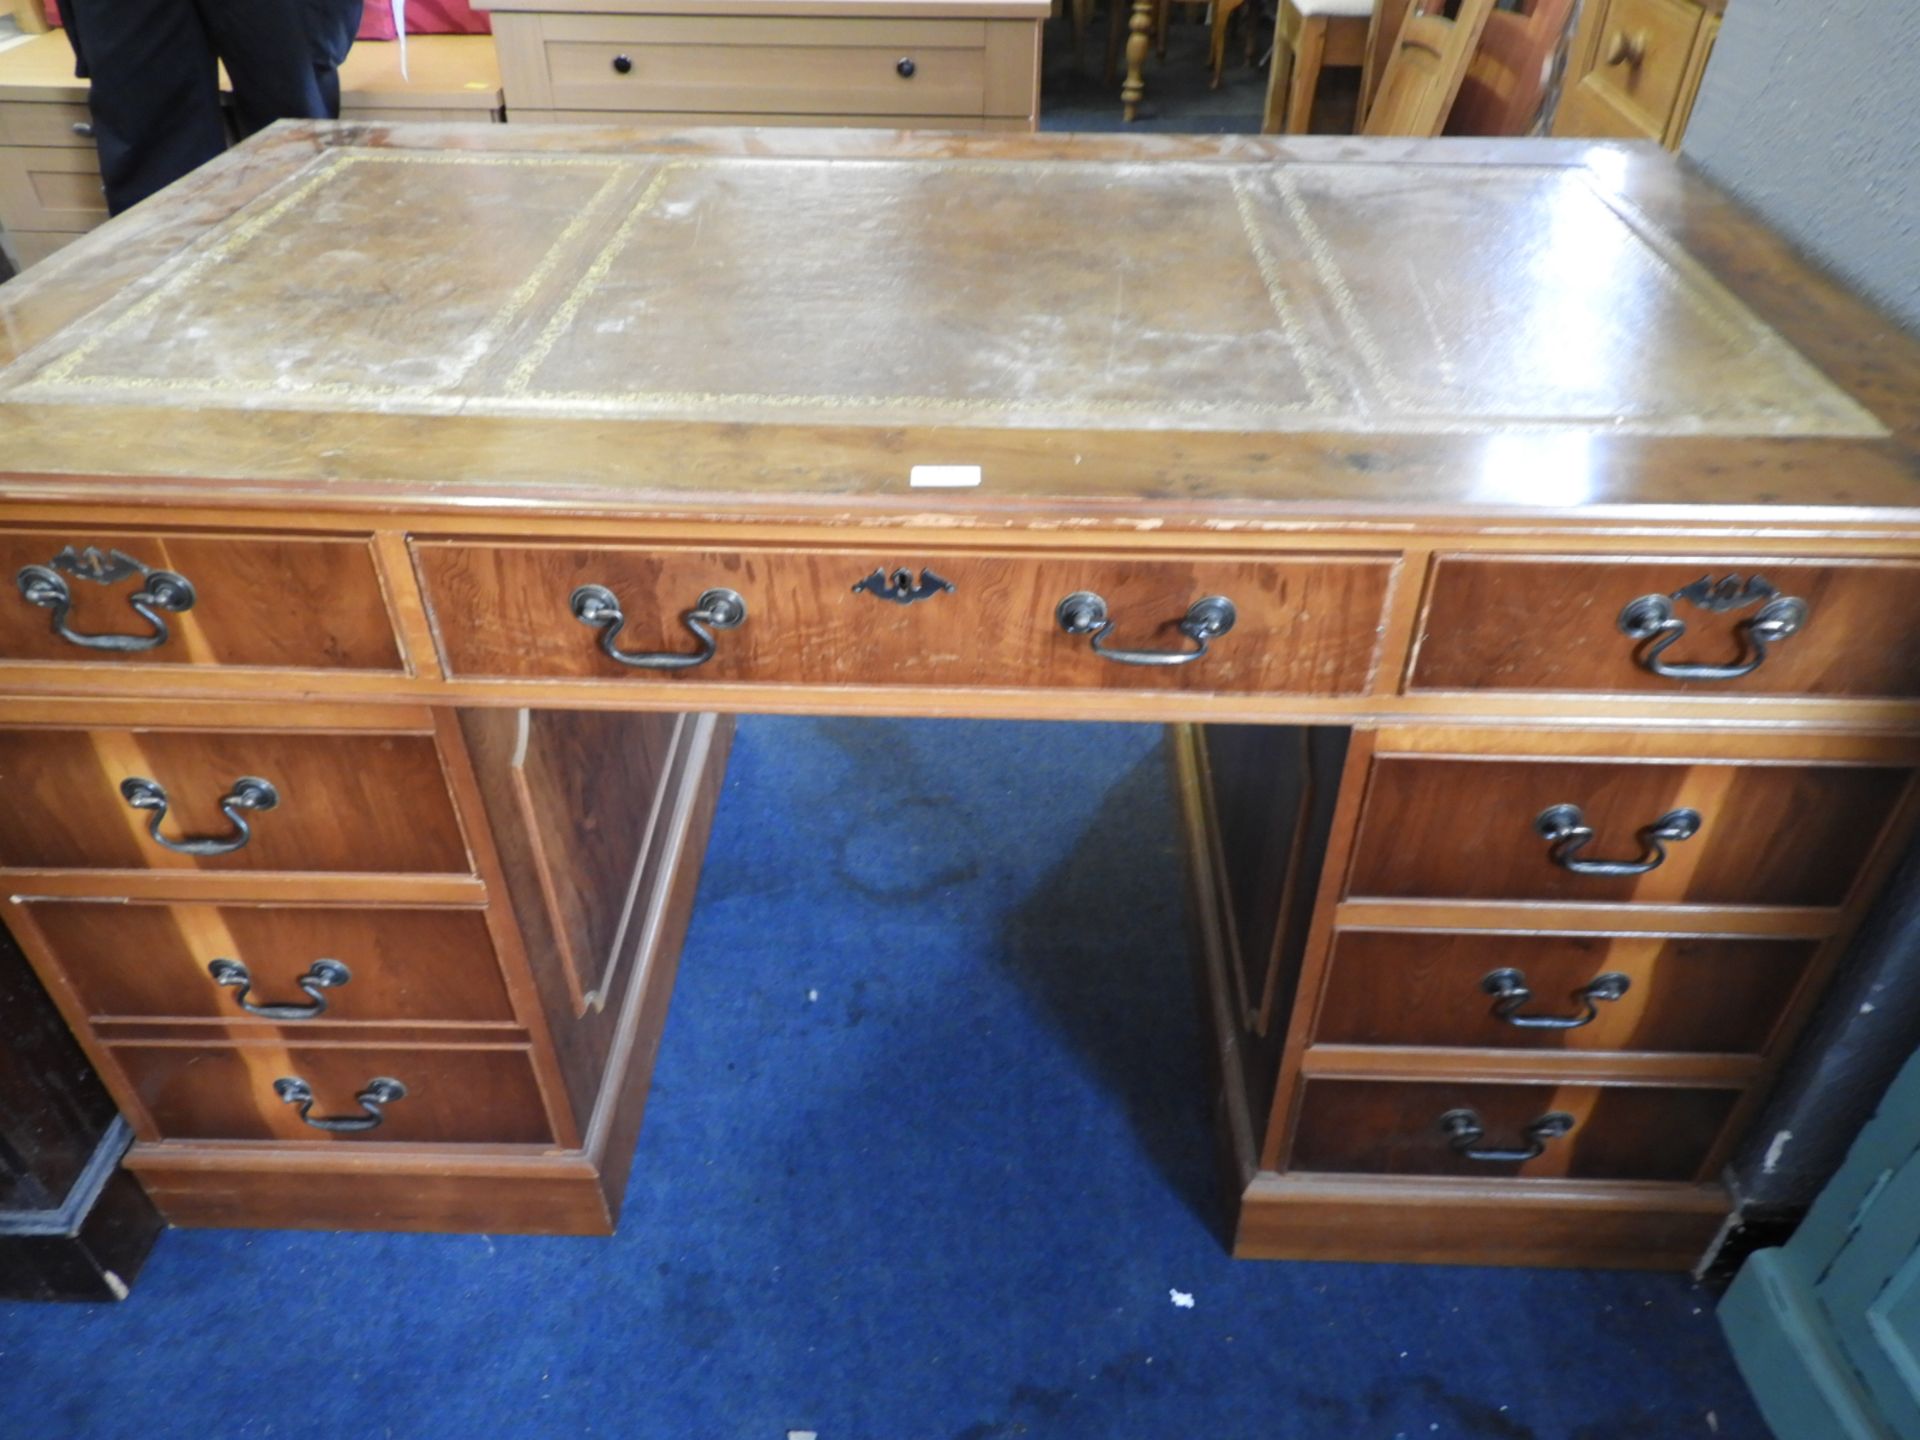 Seven Drawer Desk with Tool Inlet Leather Top